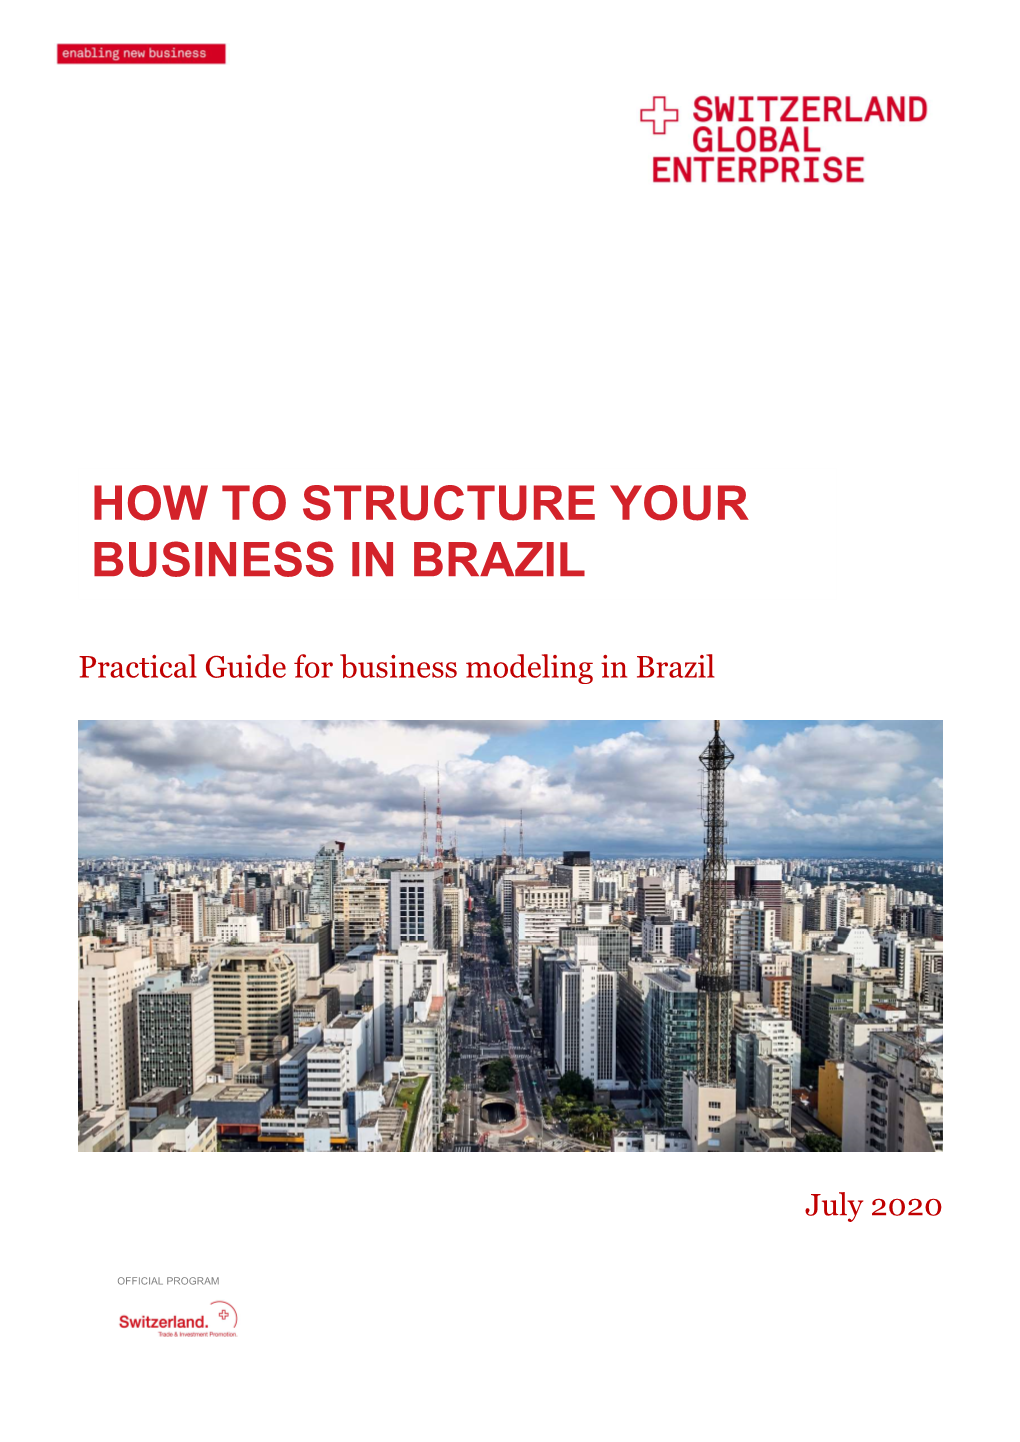 How to Structure Your Business in Brazil